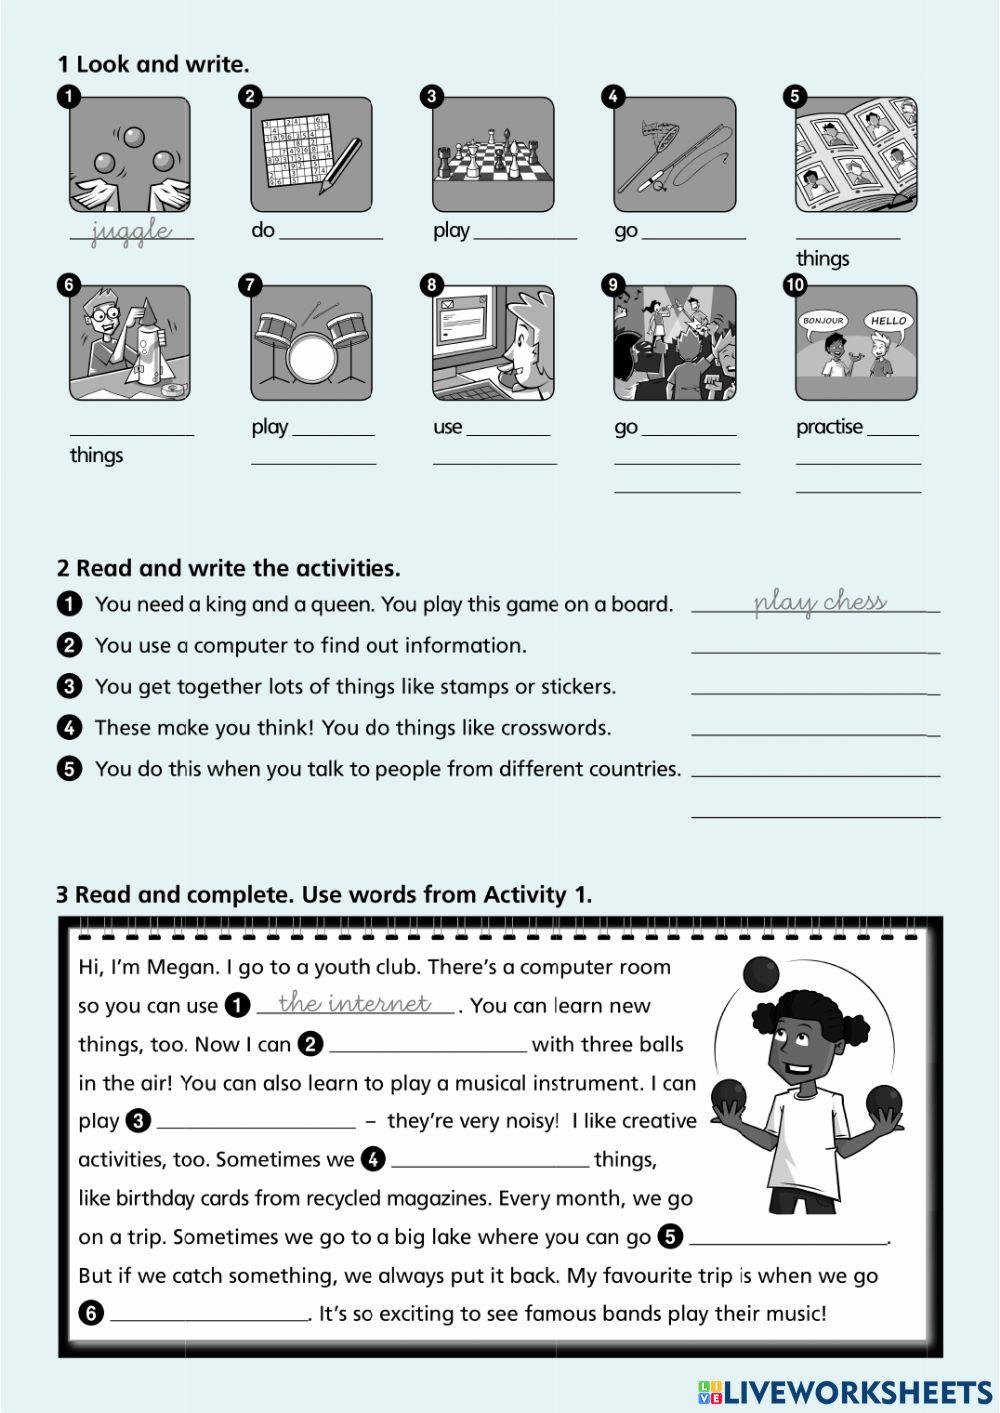 Free time activities vocabulary review